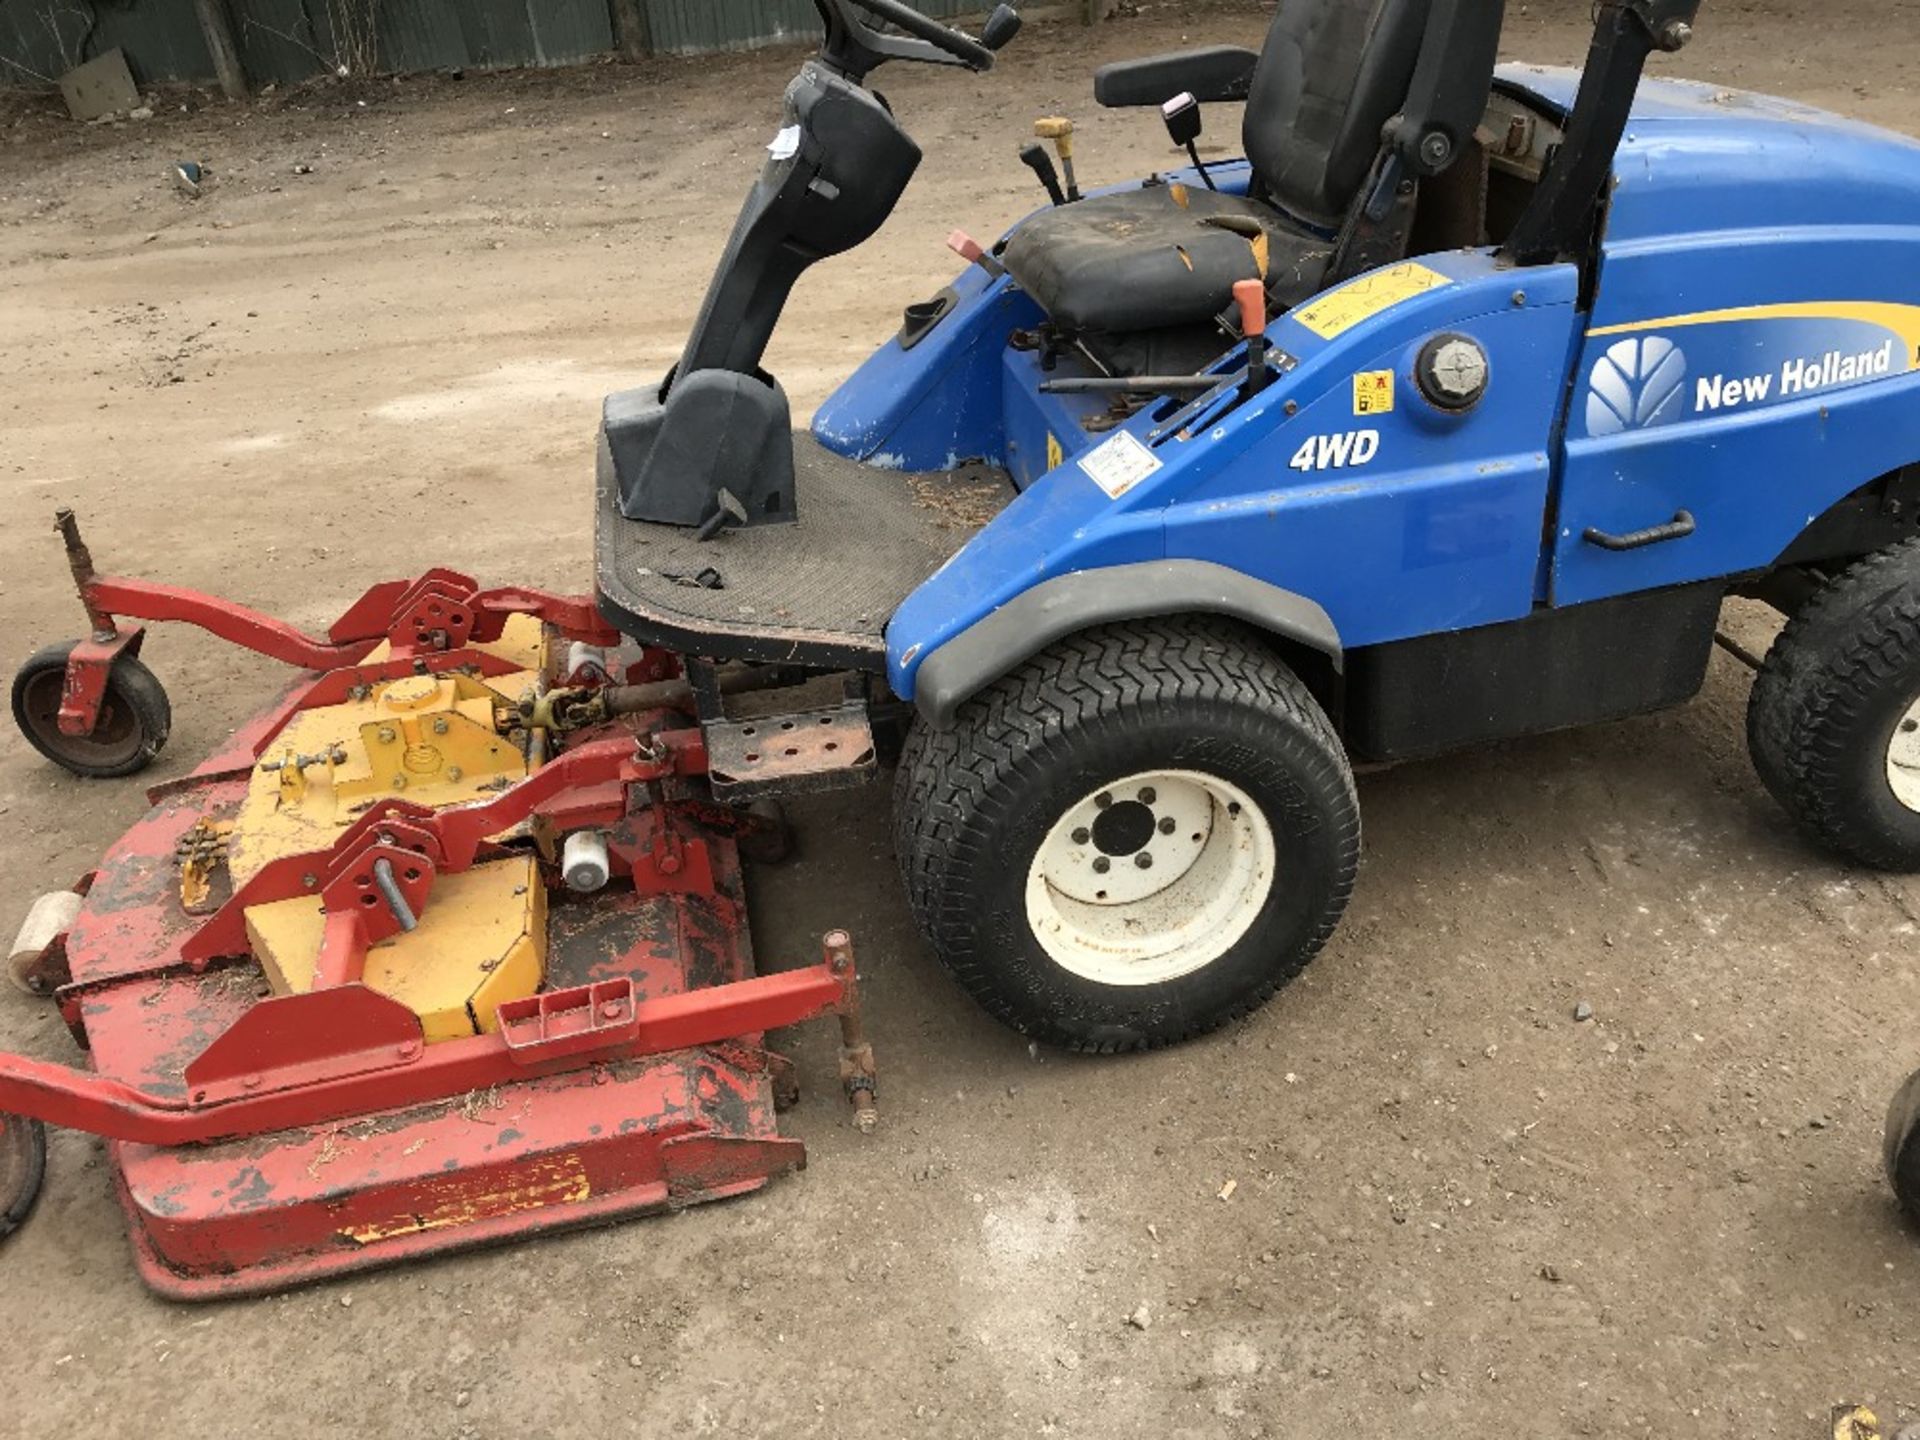 New Holland 4wd out-front mower WHEN TESTED WAS SEEN TO DRIVE AND MOWERS TURNED